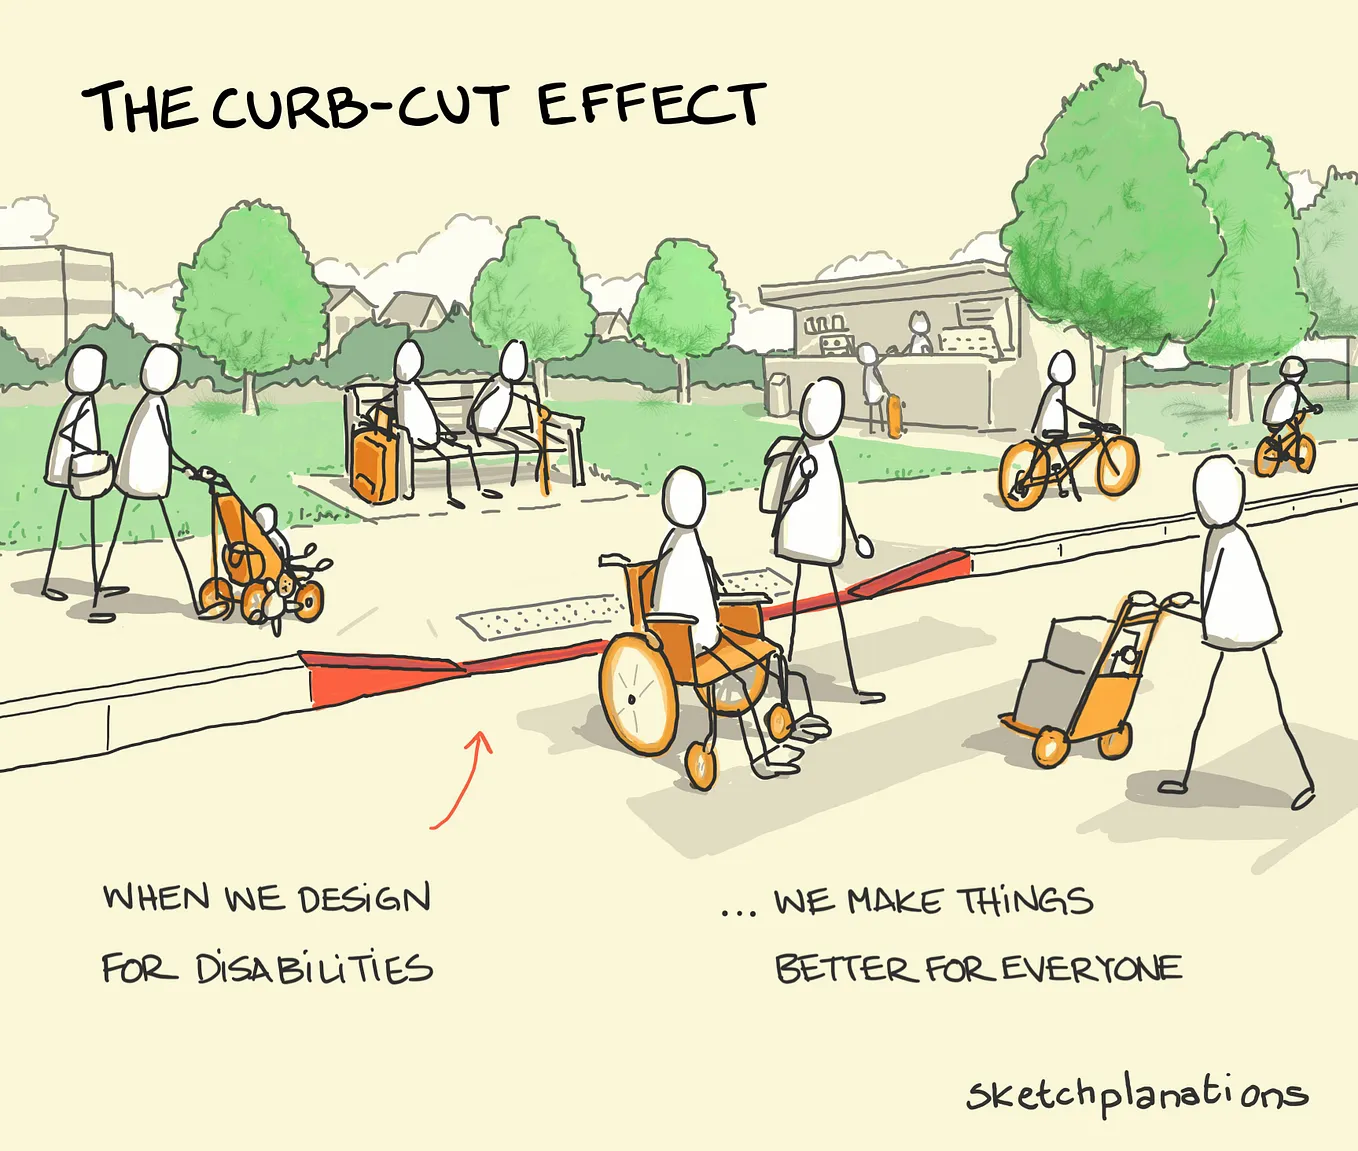 The “Curb-Cut Effect” refers to designs initially intended to assist a specific group but end up benefiting a broader range of people. (Image source: Sketchplanations)